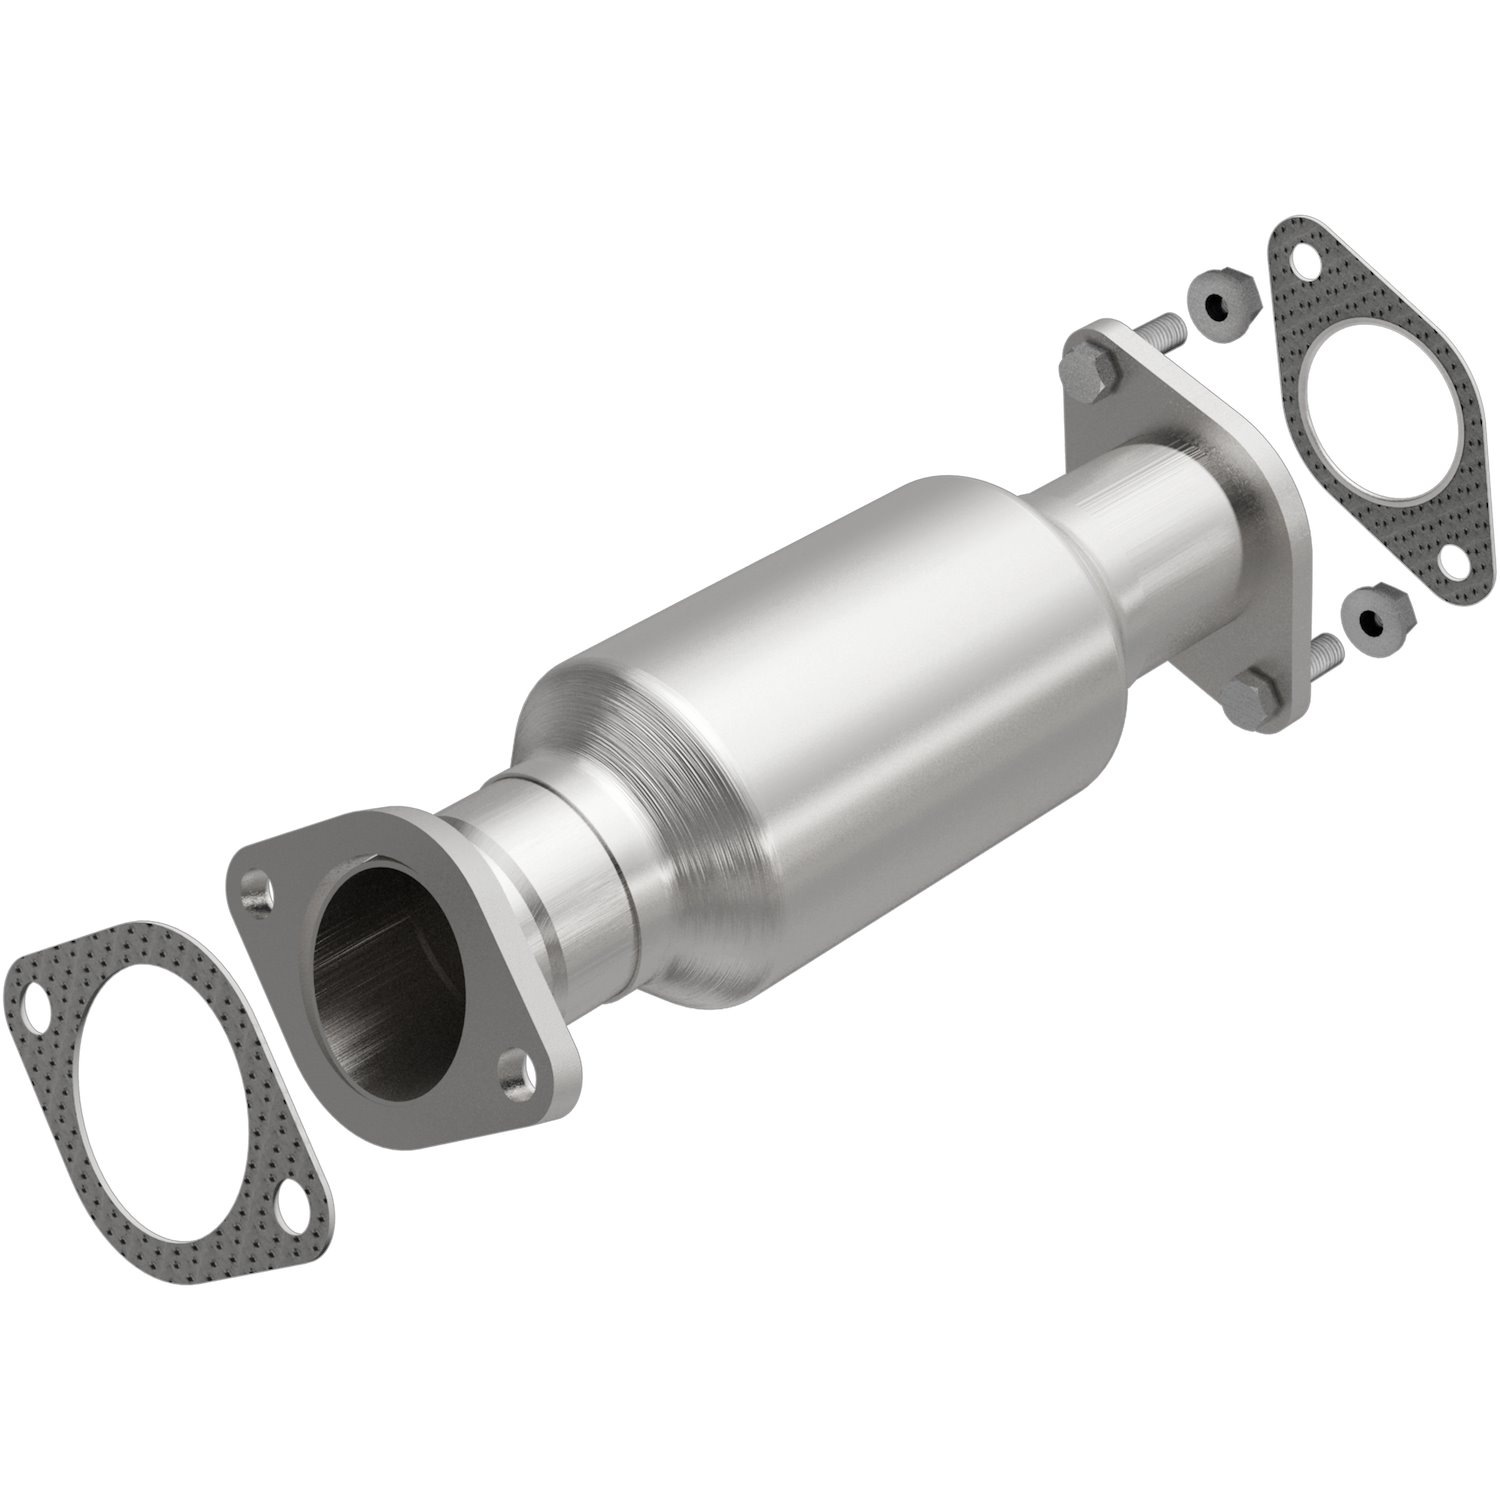 OEM Grade Federal / EPA Compliant Direct-Fit Catalytic Converter 52644